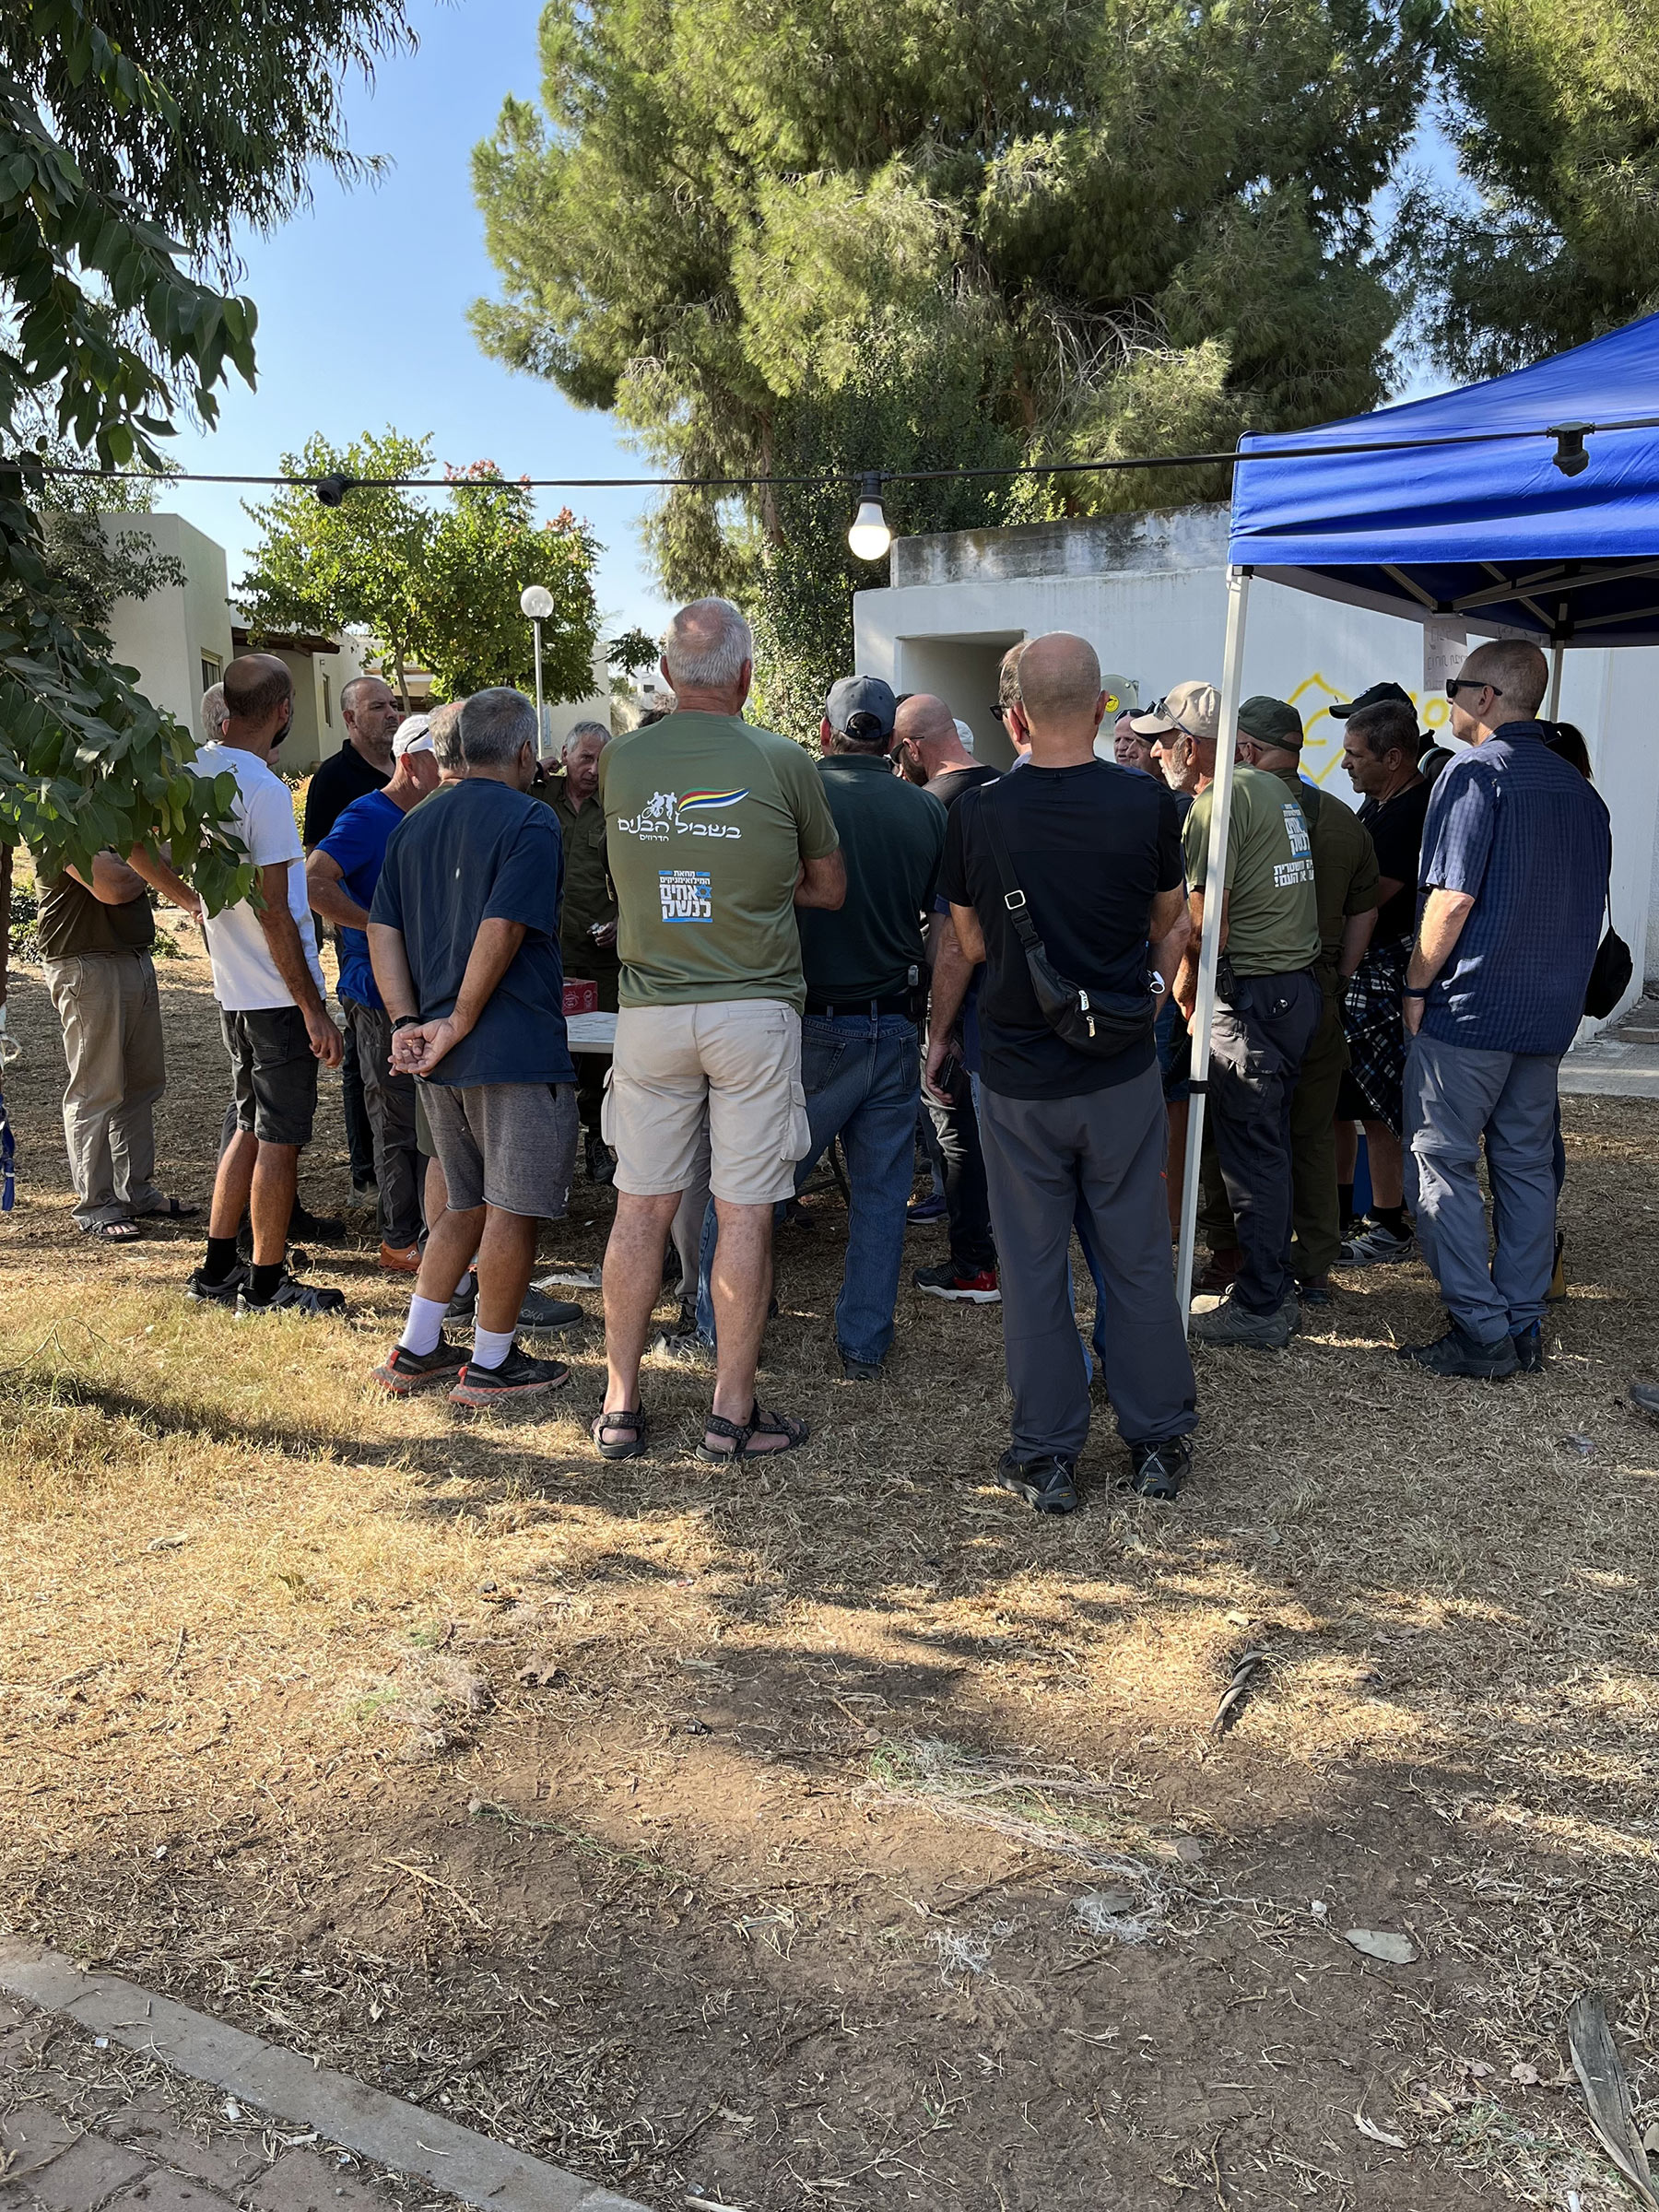 A group of volunteers await clean up orders in Kfar Aza. Residents from Kfar Aza and other nearby kibbutzim meet as frequently as they are allowed to rebuild the kibbutz.